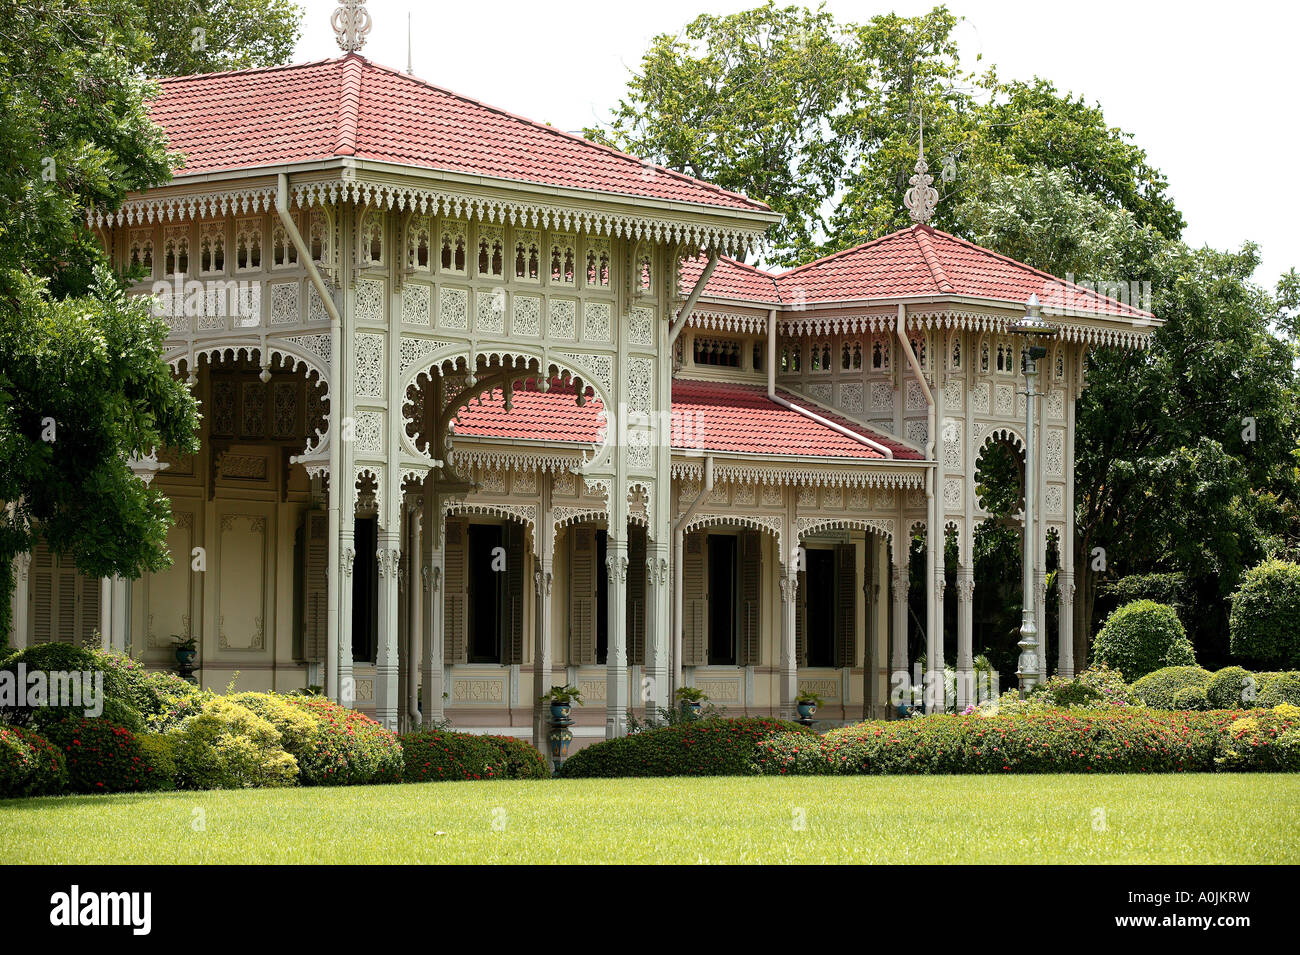 Exterior view of the Abhisek Dusit Throne Hall in Dusit Park Bangkok Thailand The facade features a veranda carved in timber latticework The building now houses the Support Museum which displays traditional crafts Stock Photo